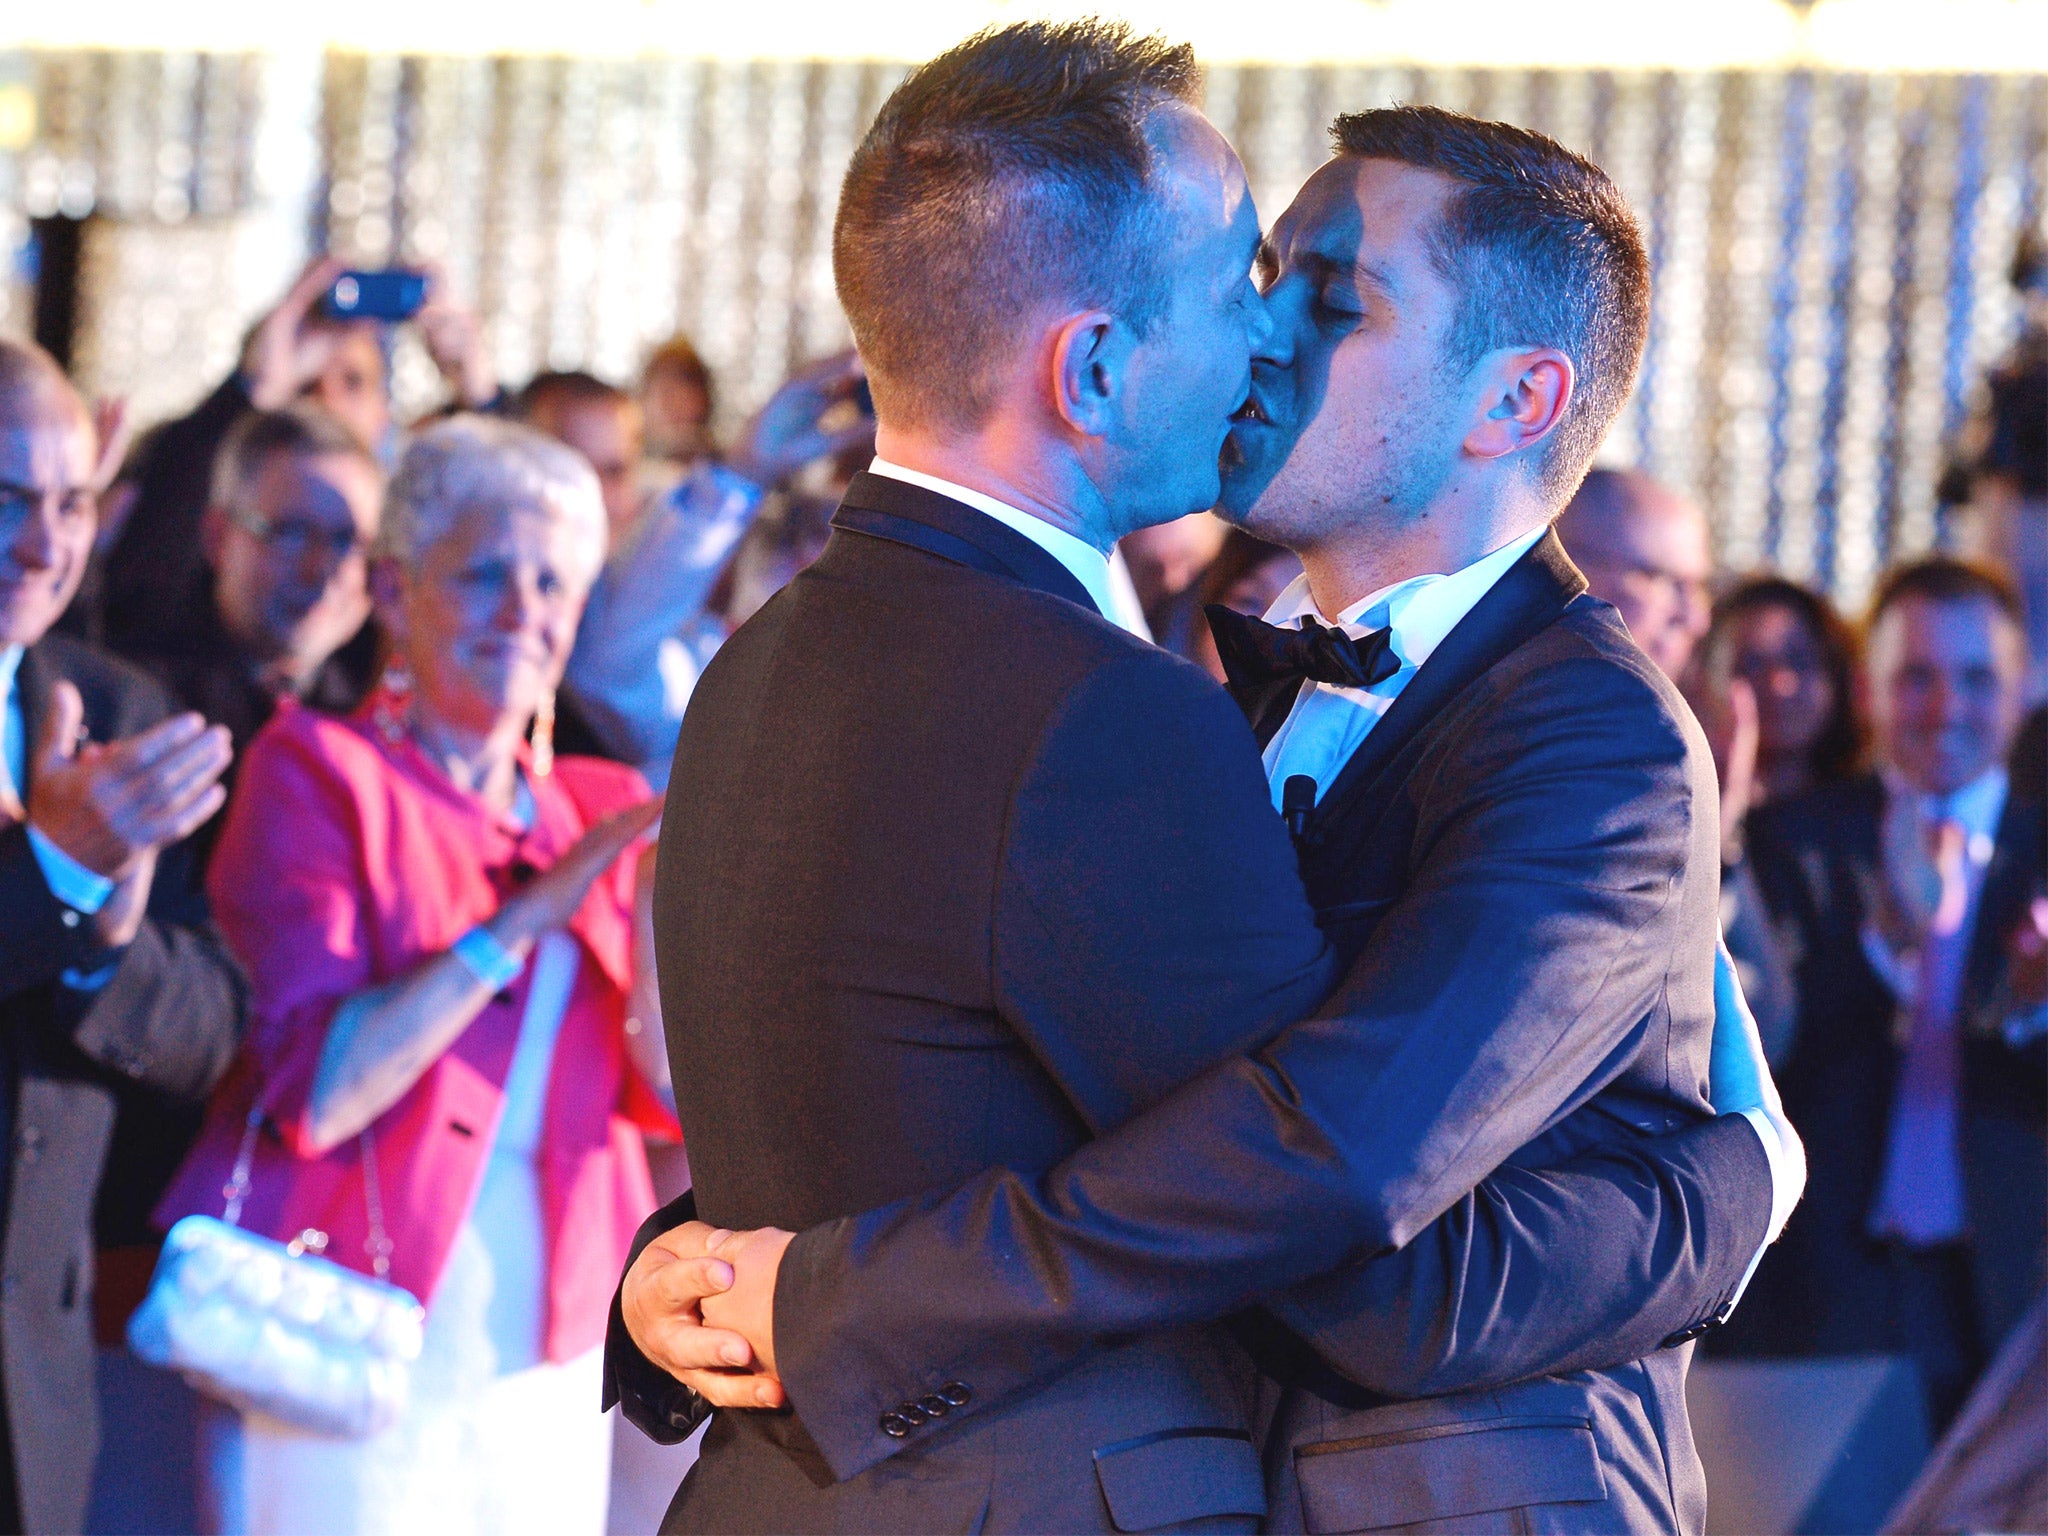 Frances first gay marriage Sinatra plays as Vincent and Bruno make history The Independent The Independent image